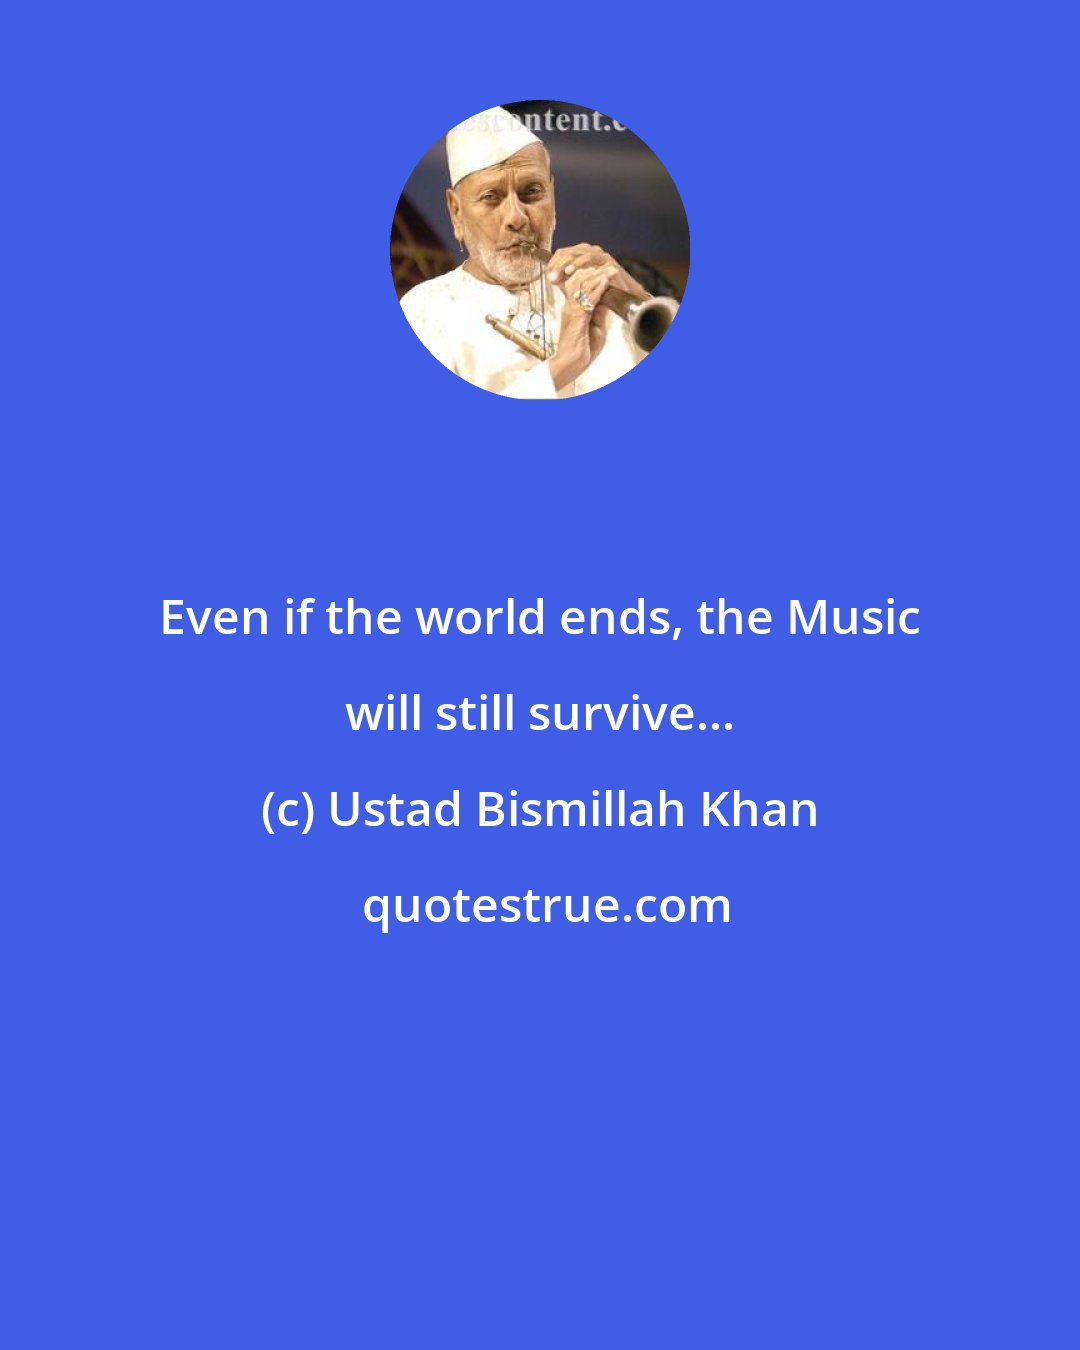 Ustad Bismillah Khan: Even if the world ends, the Music will still survive...